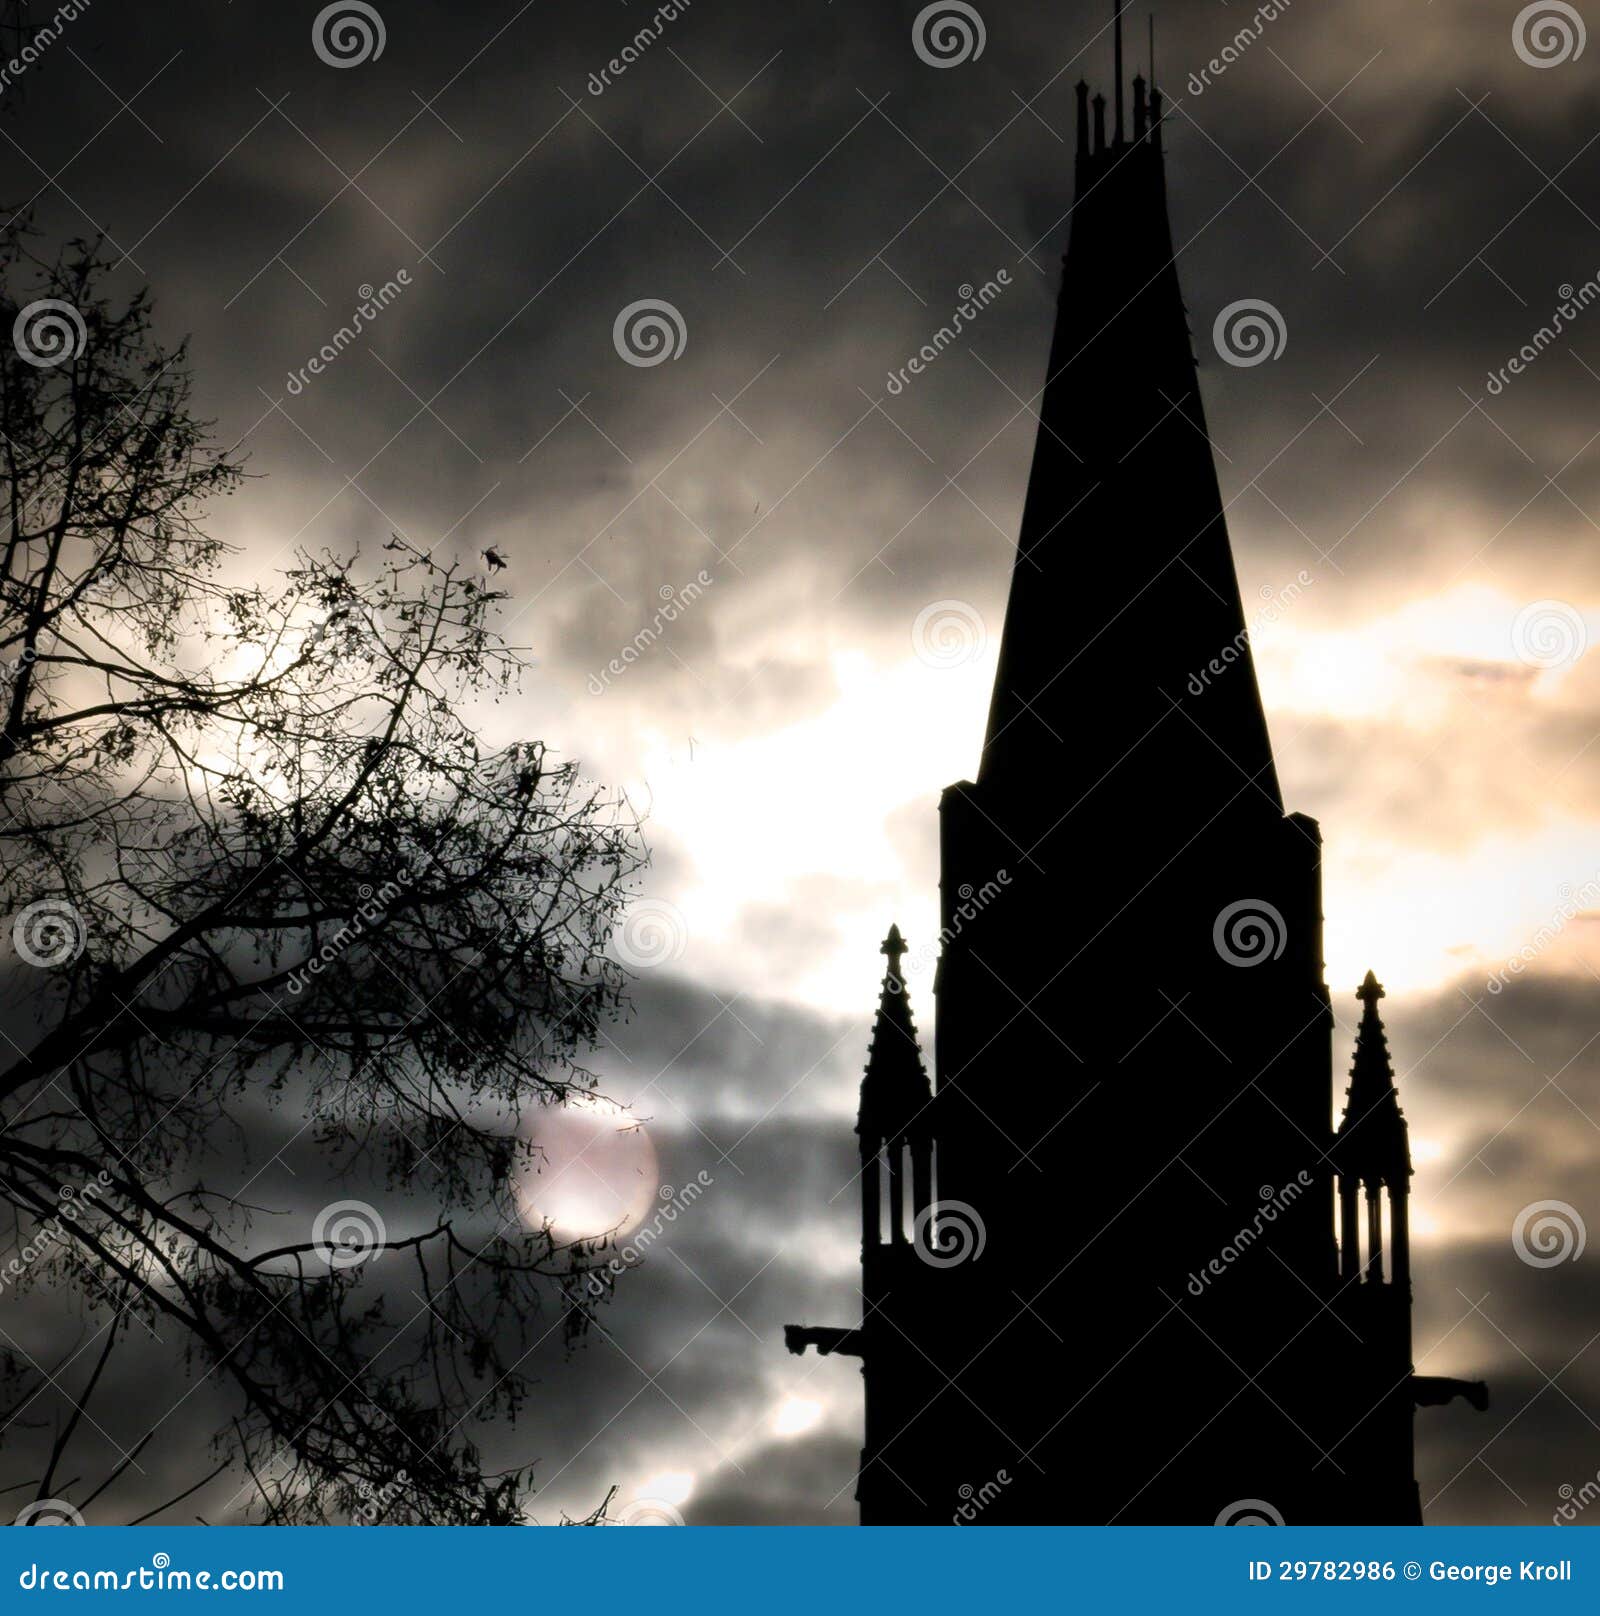 dramatic gothic building, moonlight and tree